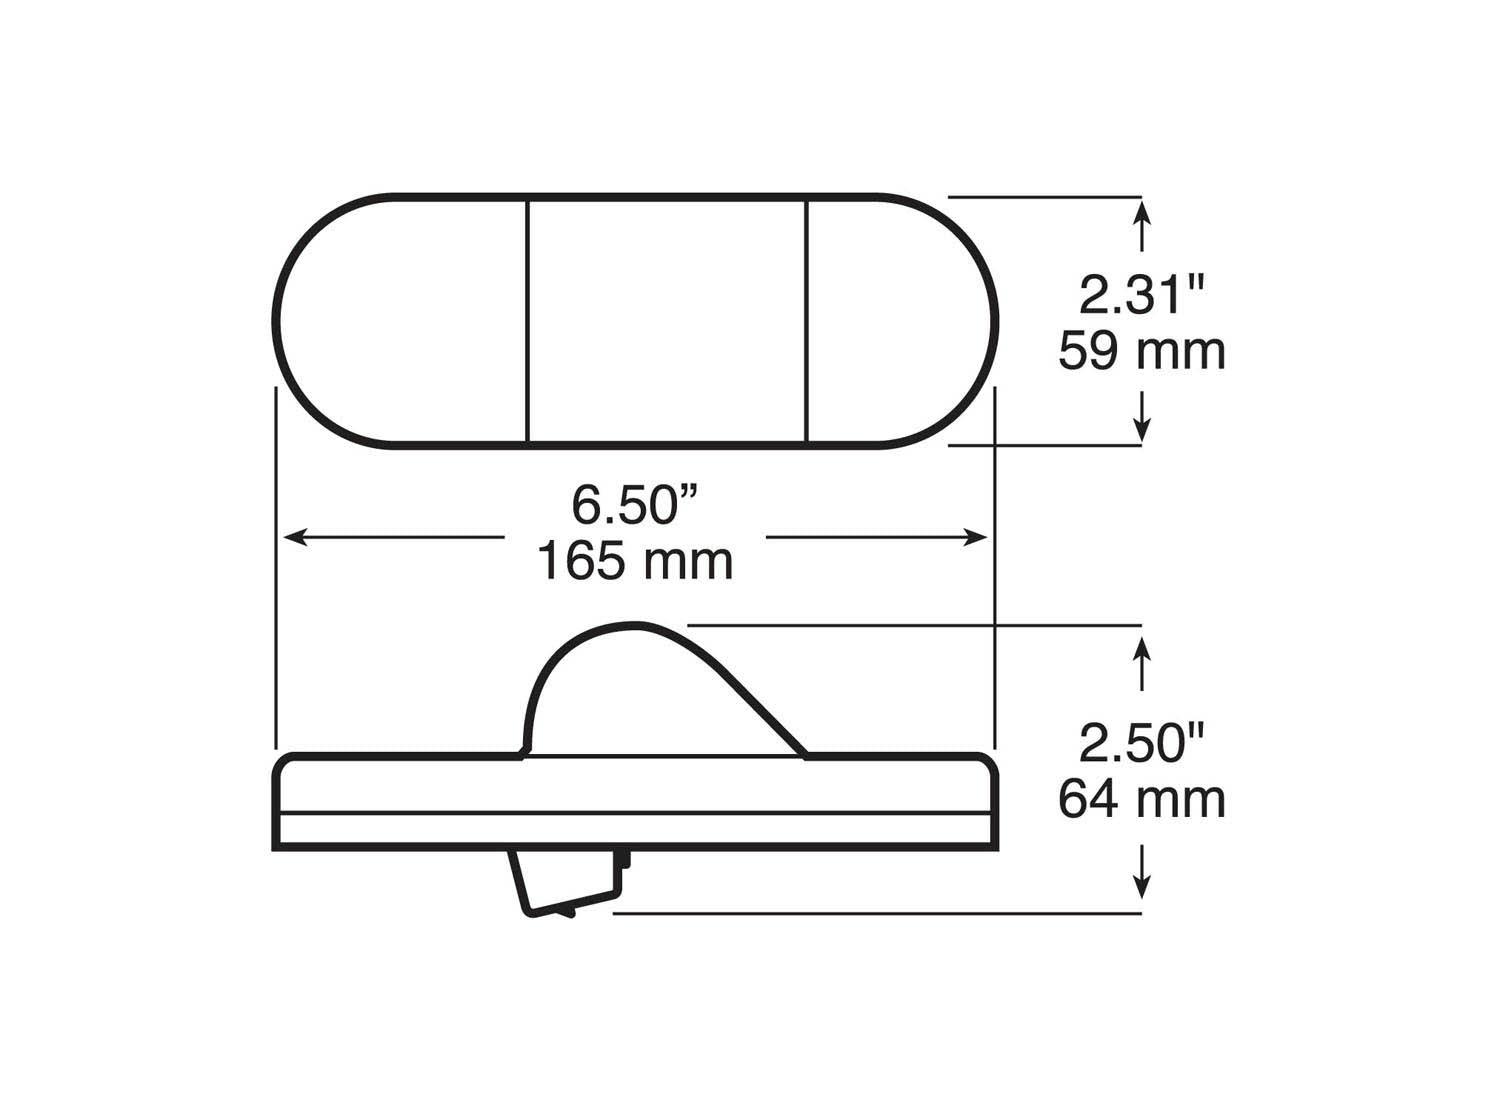 LED Mid-Turn/ Side Marker, Oval, Hardshell Connector, 6.50"X2.25", amber, bulk pack (Pack of 50) - 355_line_dual_2view-BX5-1_80ccbc73-ebdb-4445-8a9e-a0f6a7e1b18f